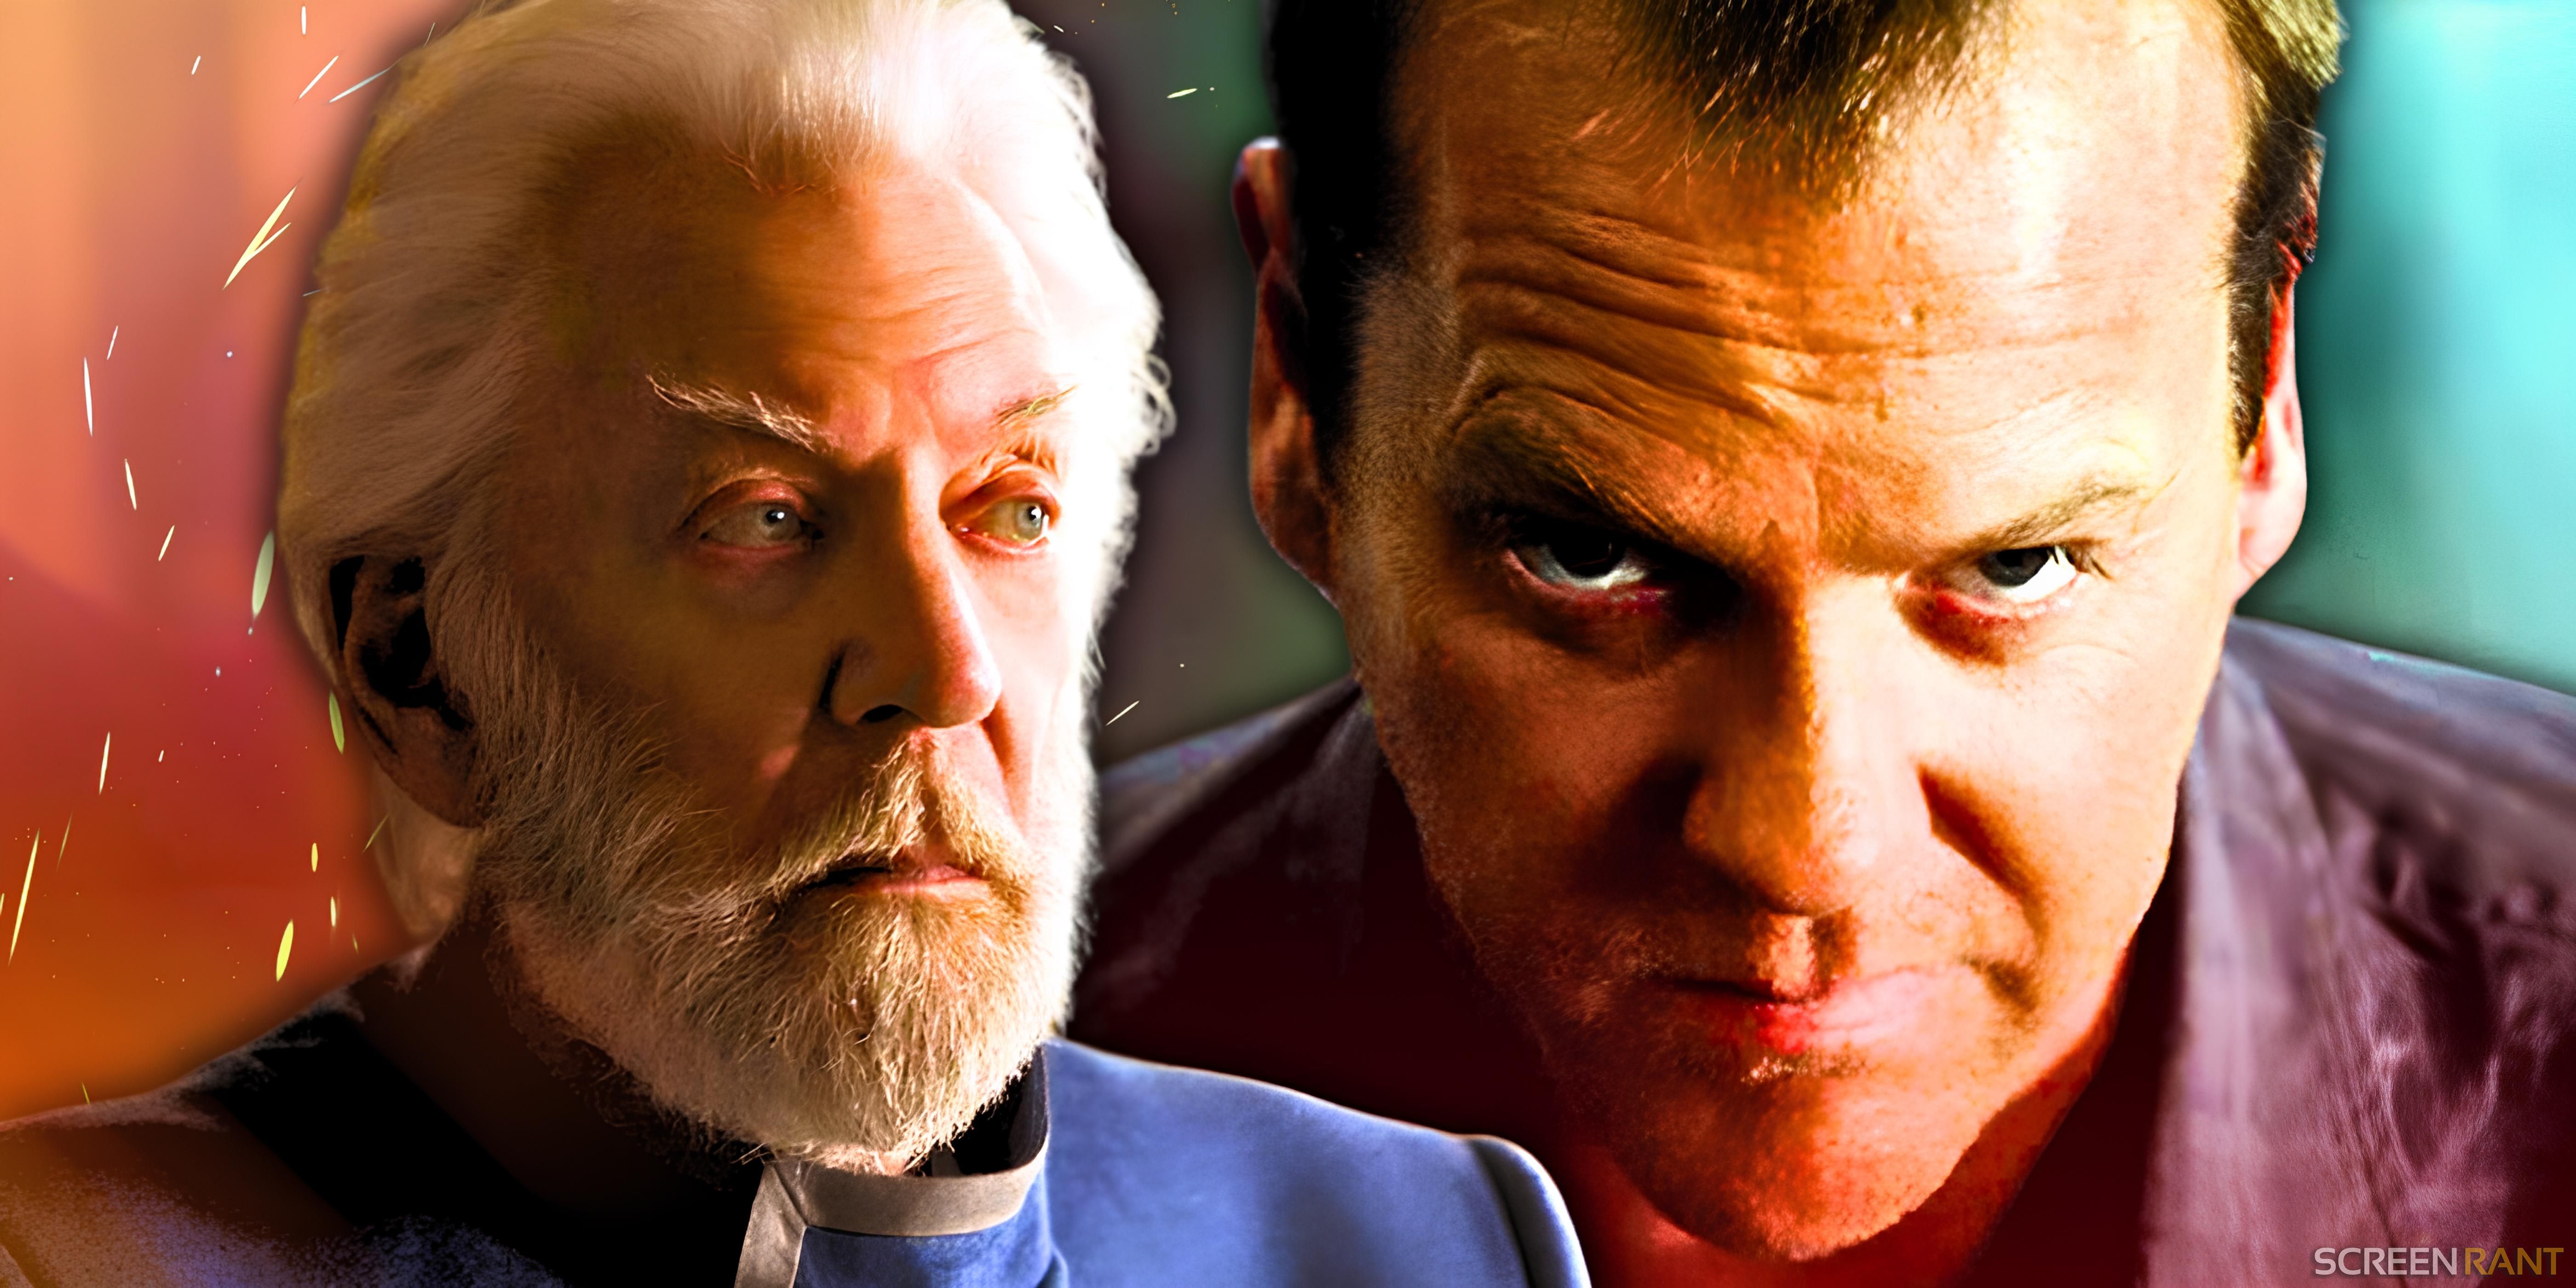 Donald Sutherland looking evil as President Snow in The Hunger Games franchise and Kiefer Sutherland's Jack Bauer being angry on 24